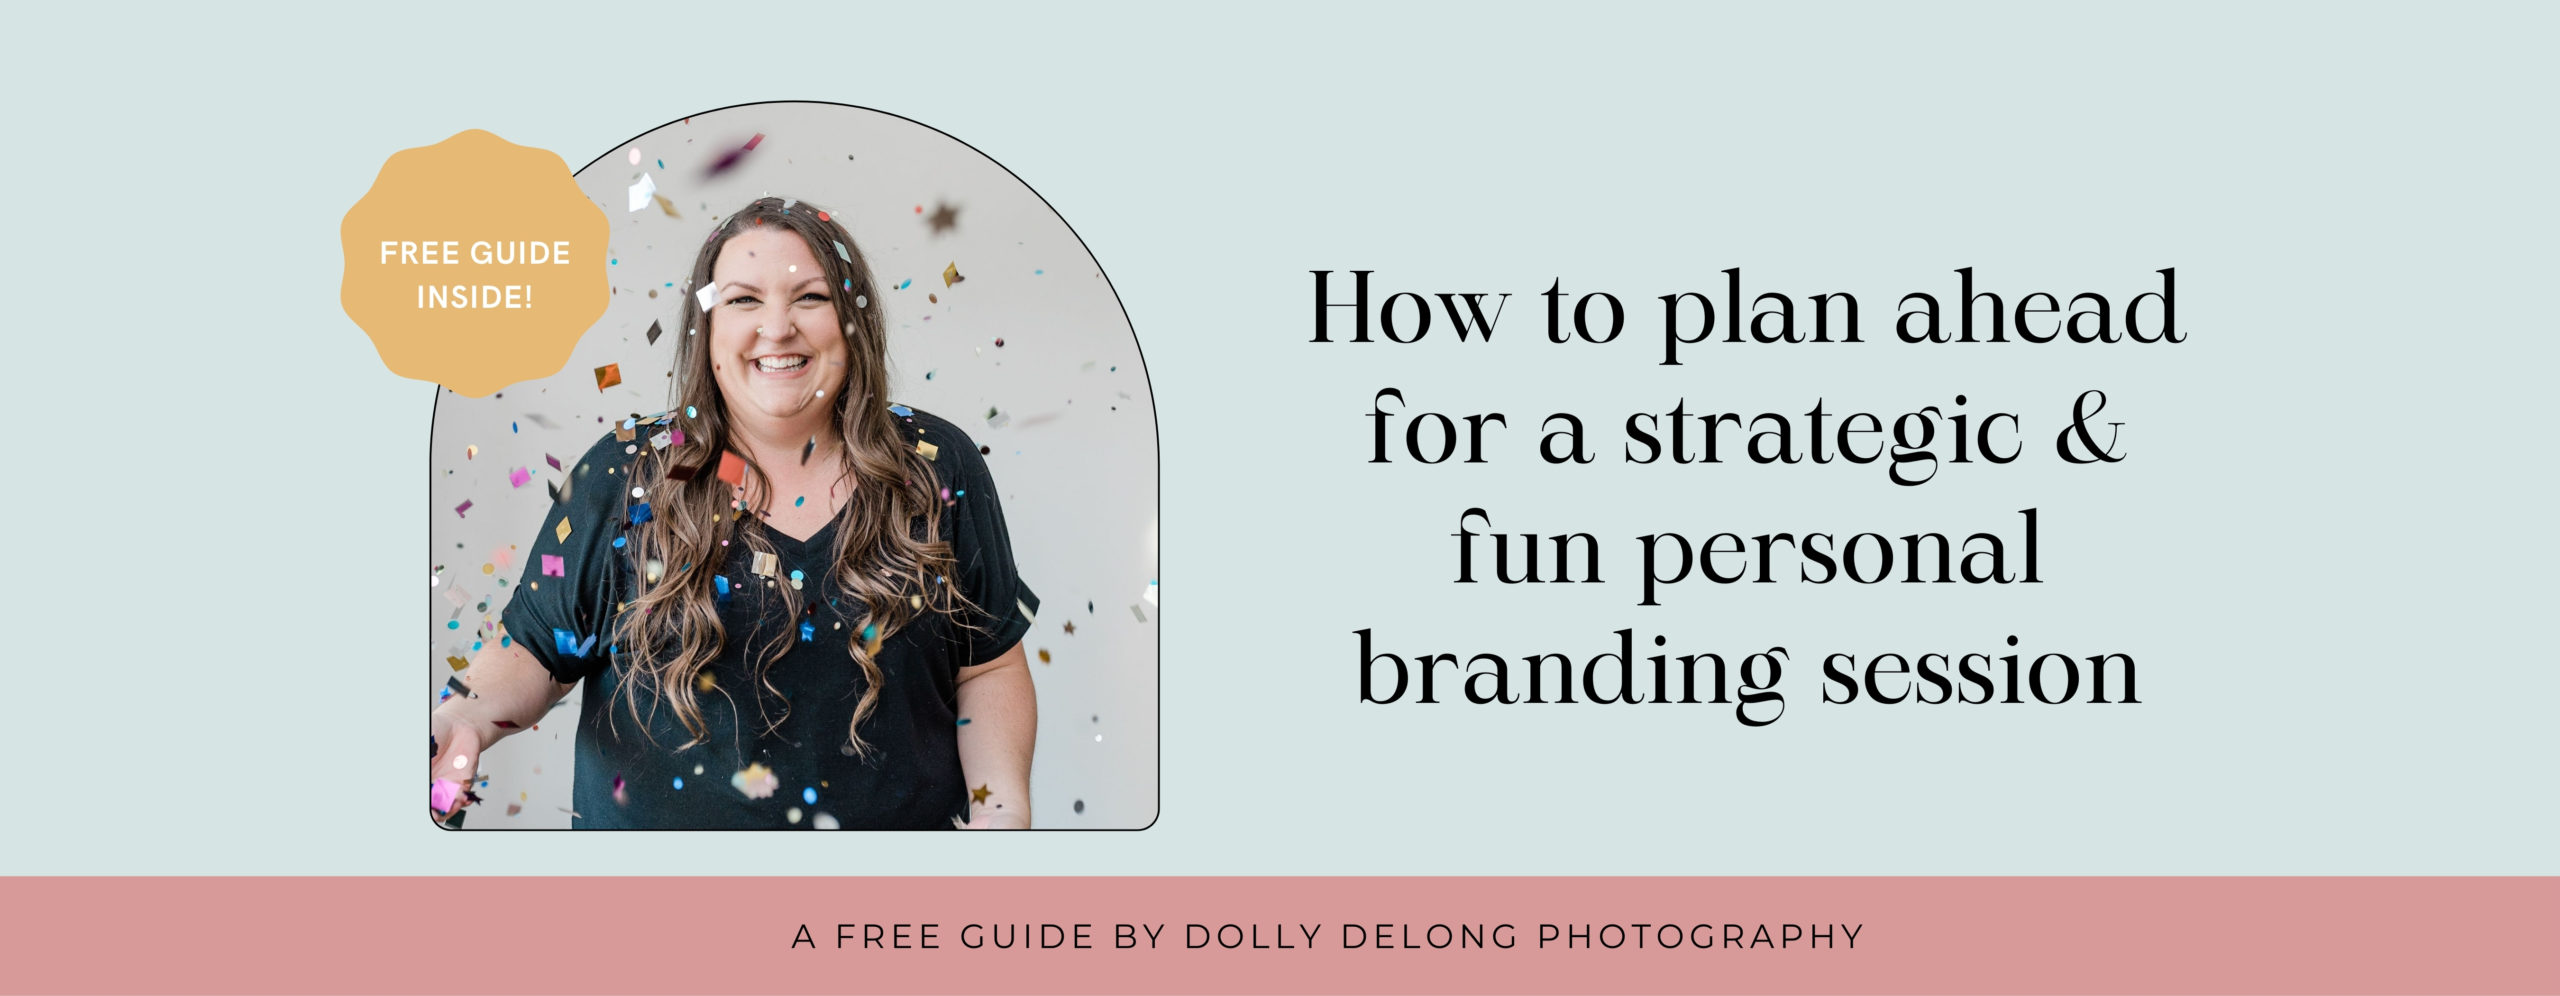 how to plan your branding session tips